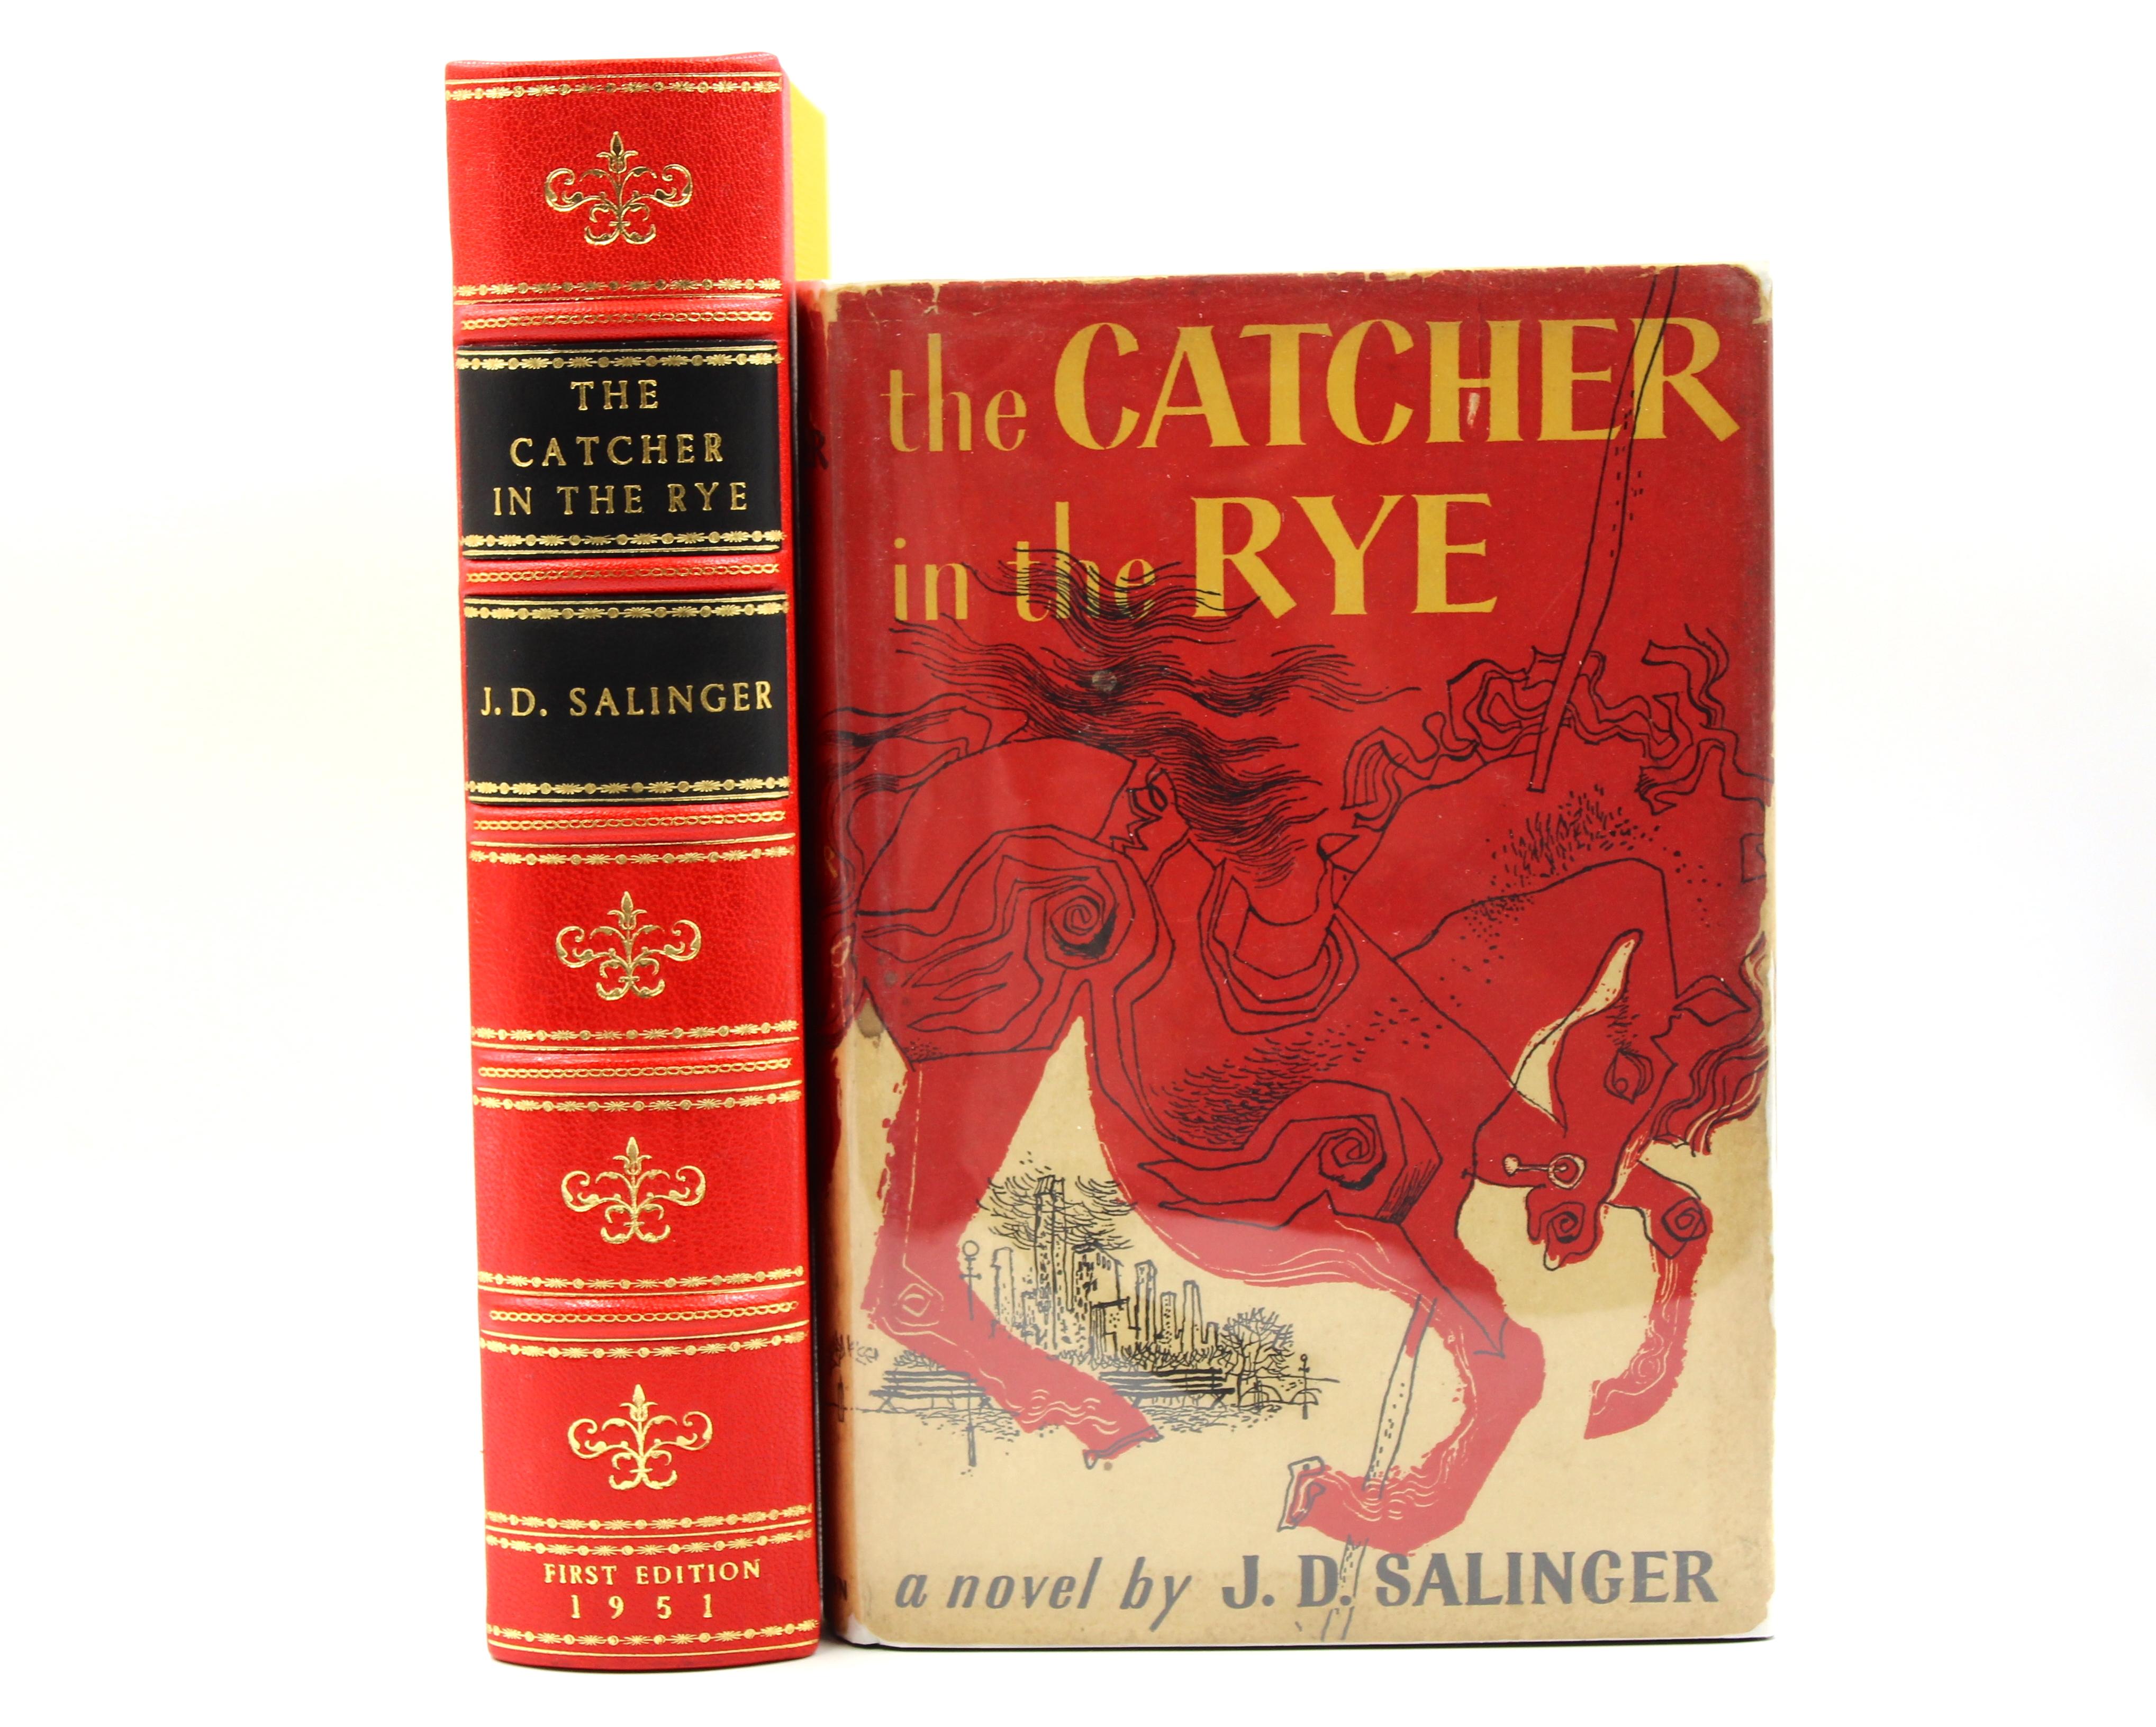 Catcher in the Rye by J.D. Salinger, First Edition, in Dust Jacket, 1951 For Sale 2